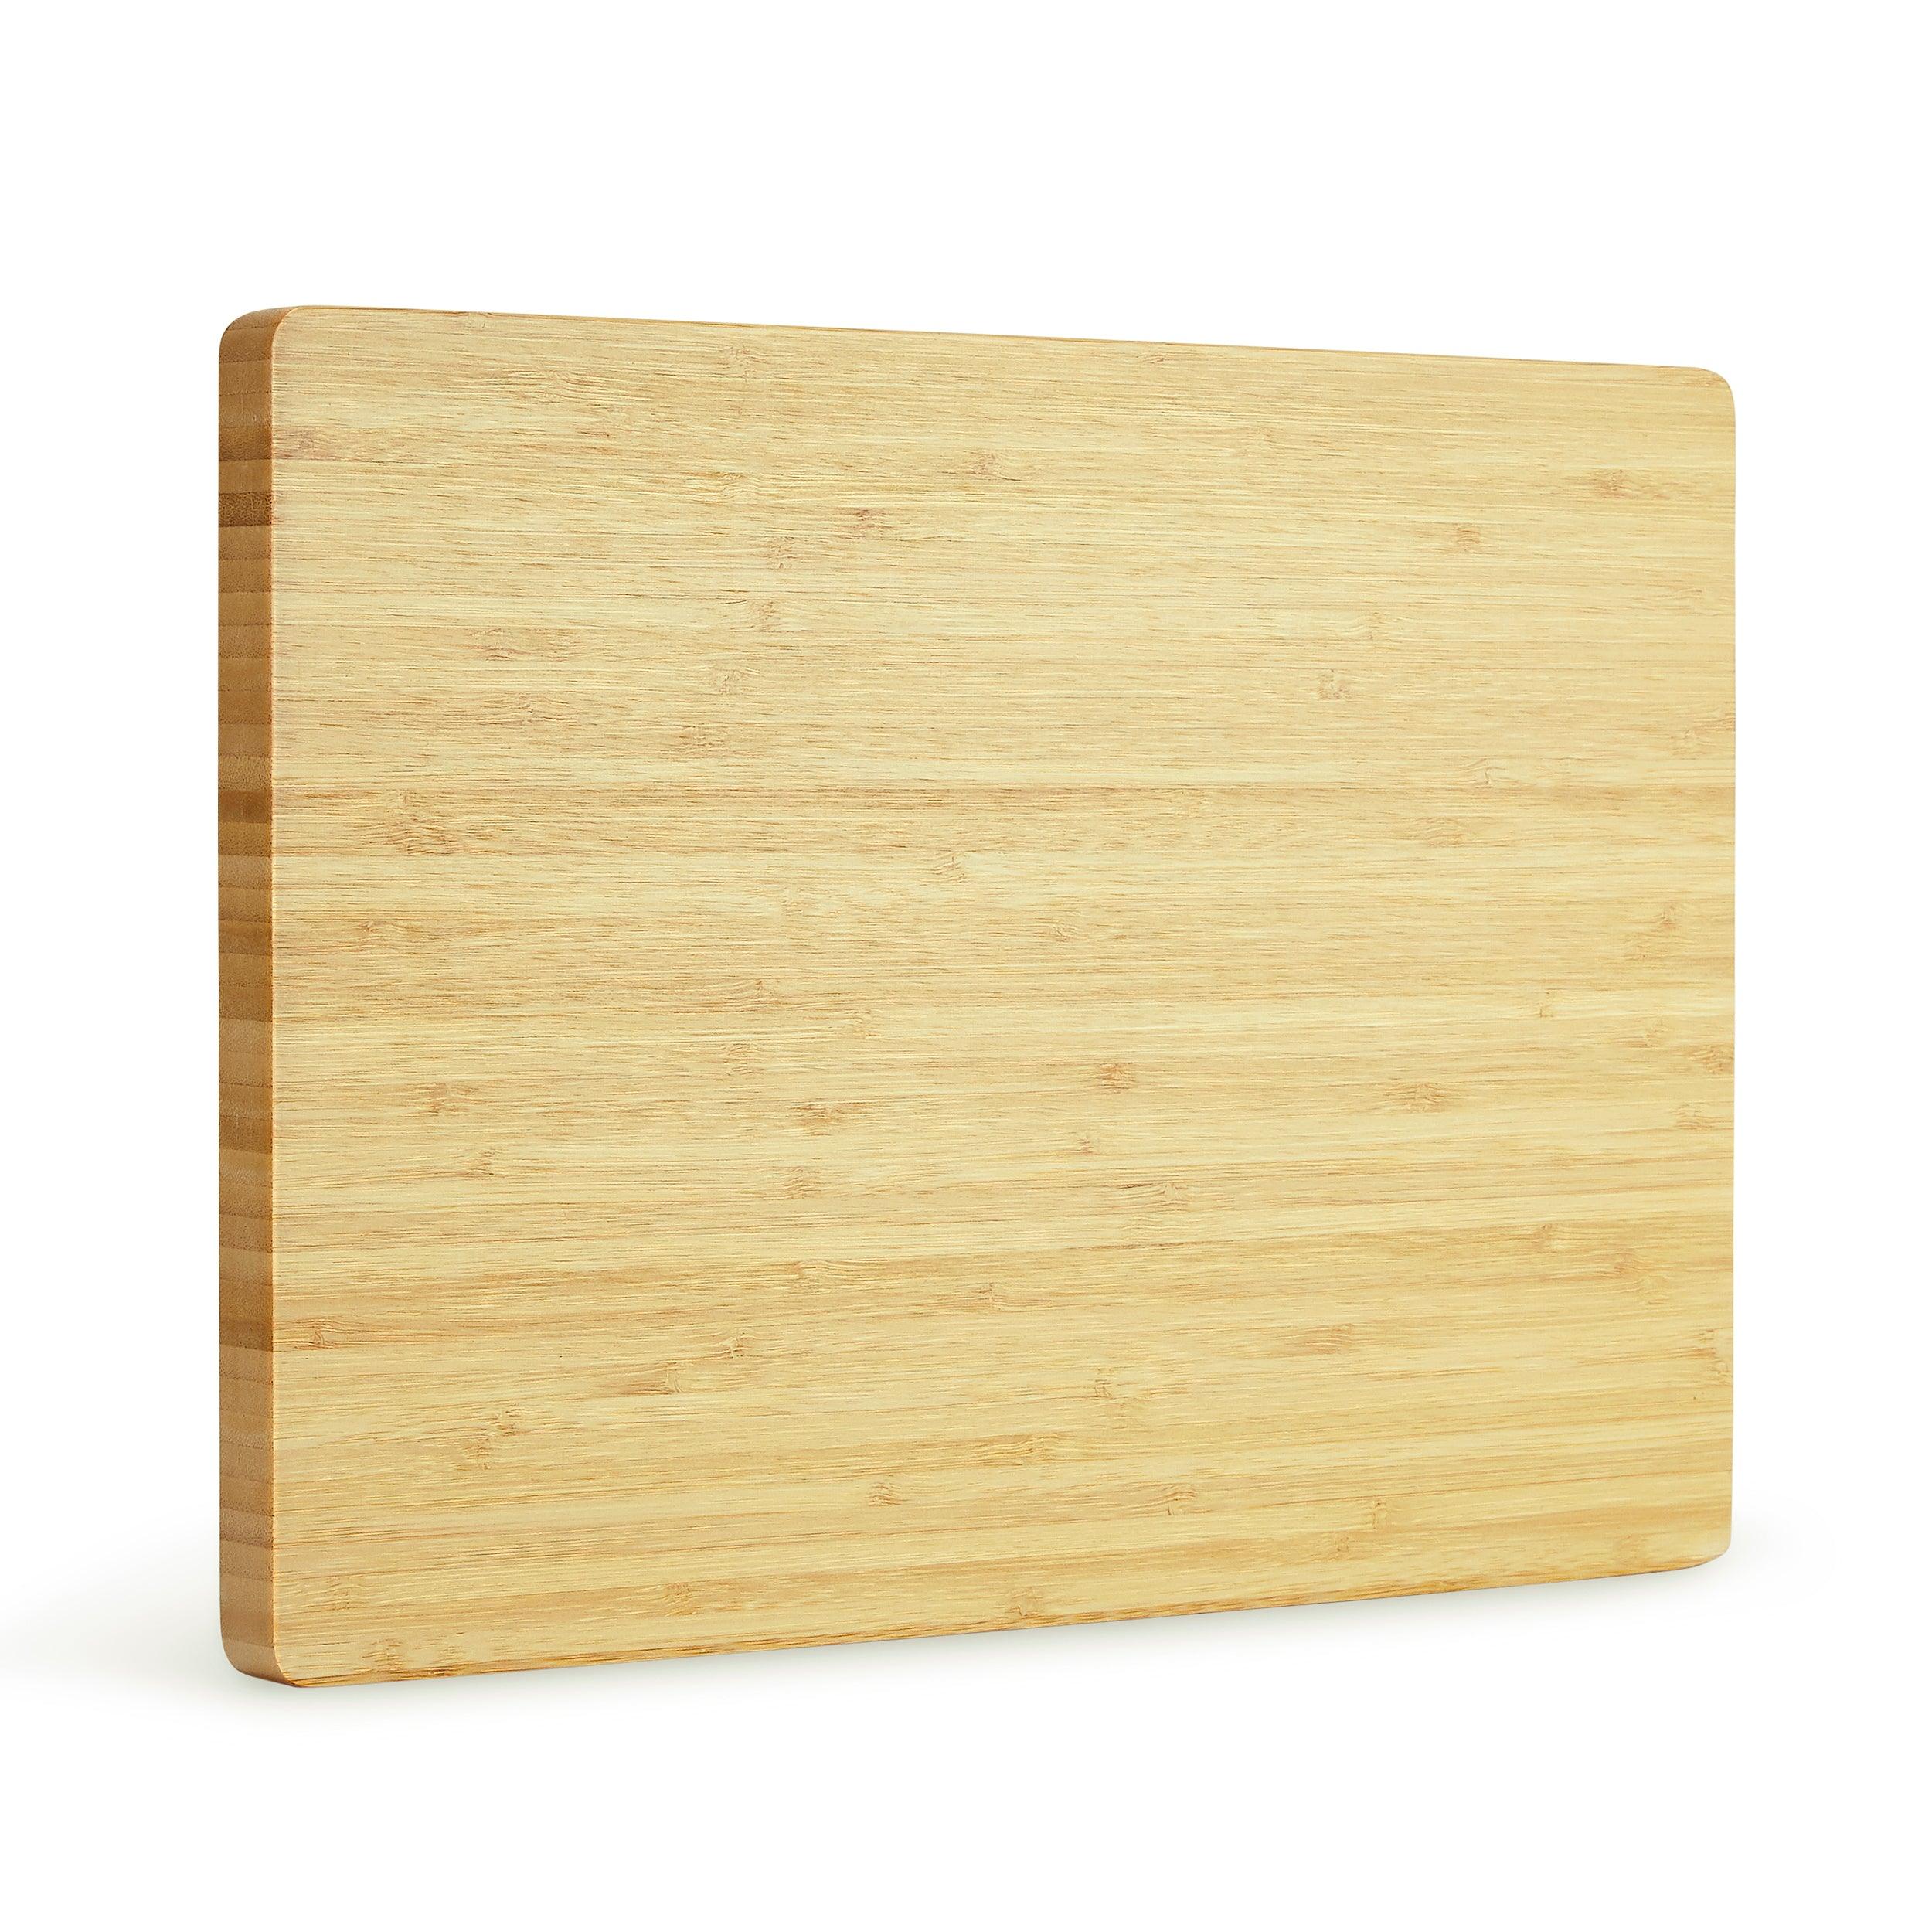 New: Hardwood Cutting Board - Small 10 x 8 Made in USA – MadeinUSAForever